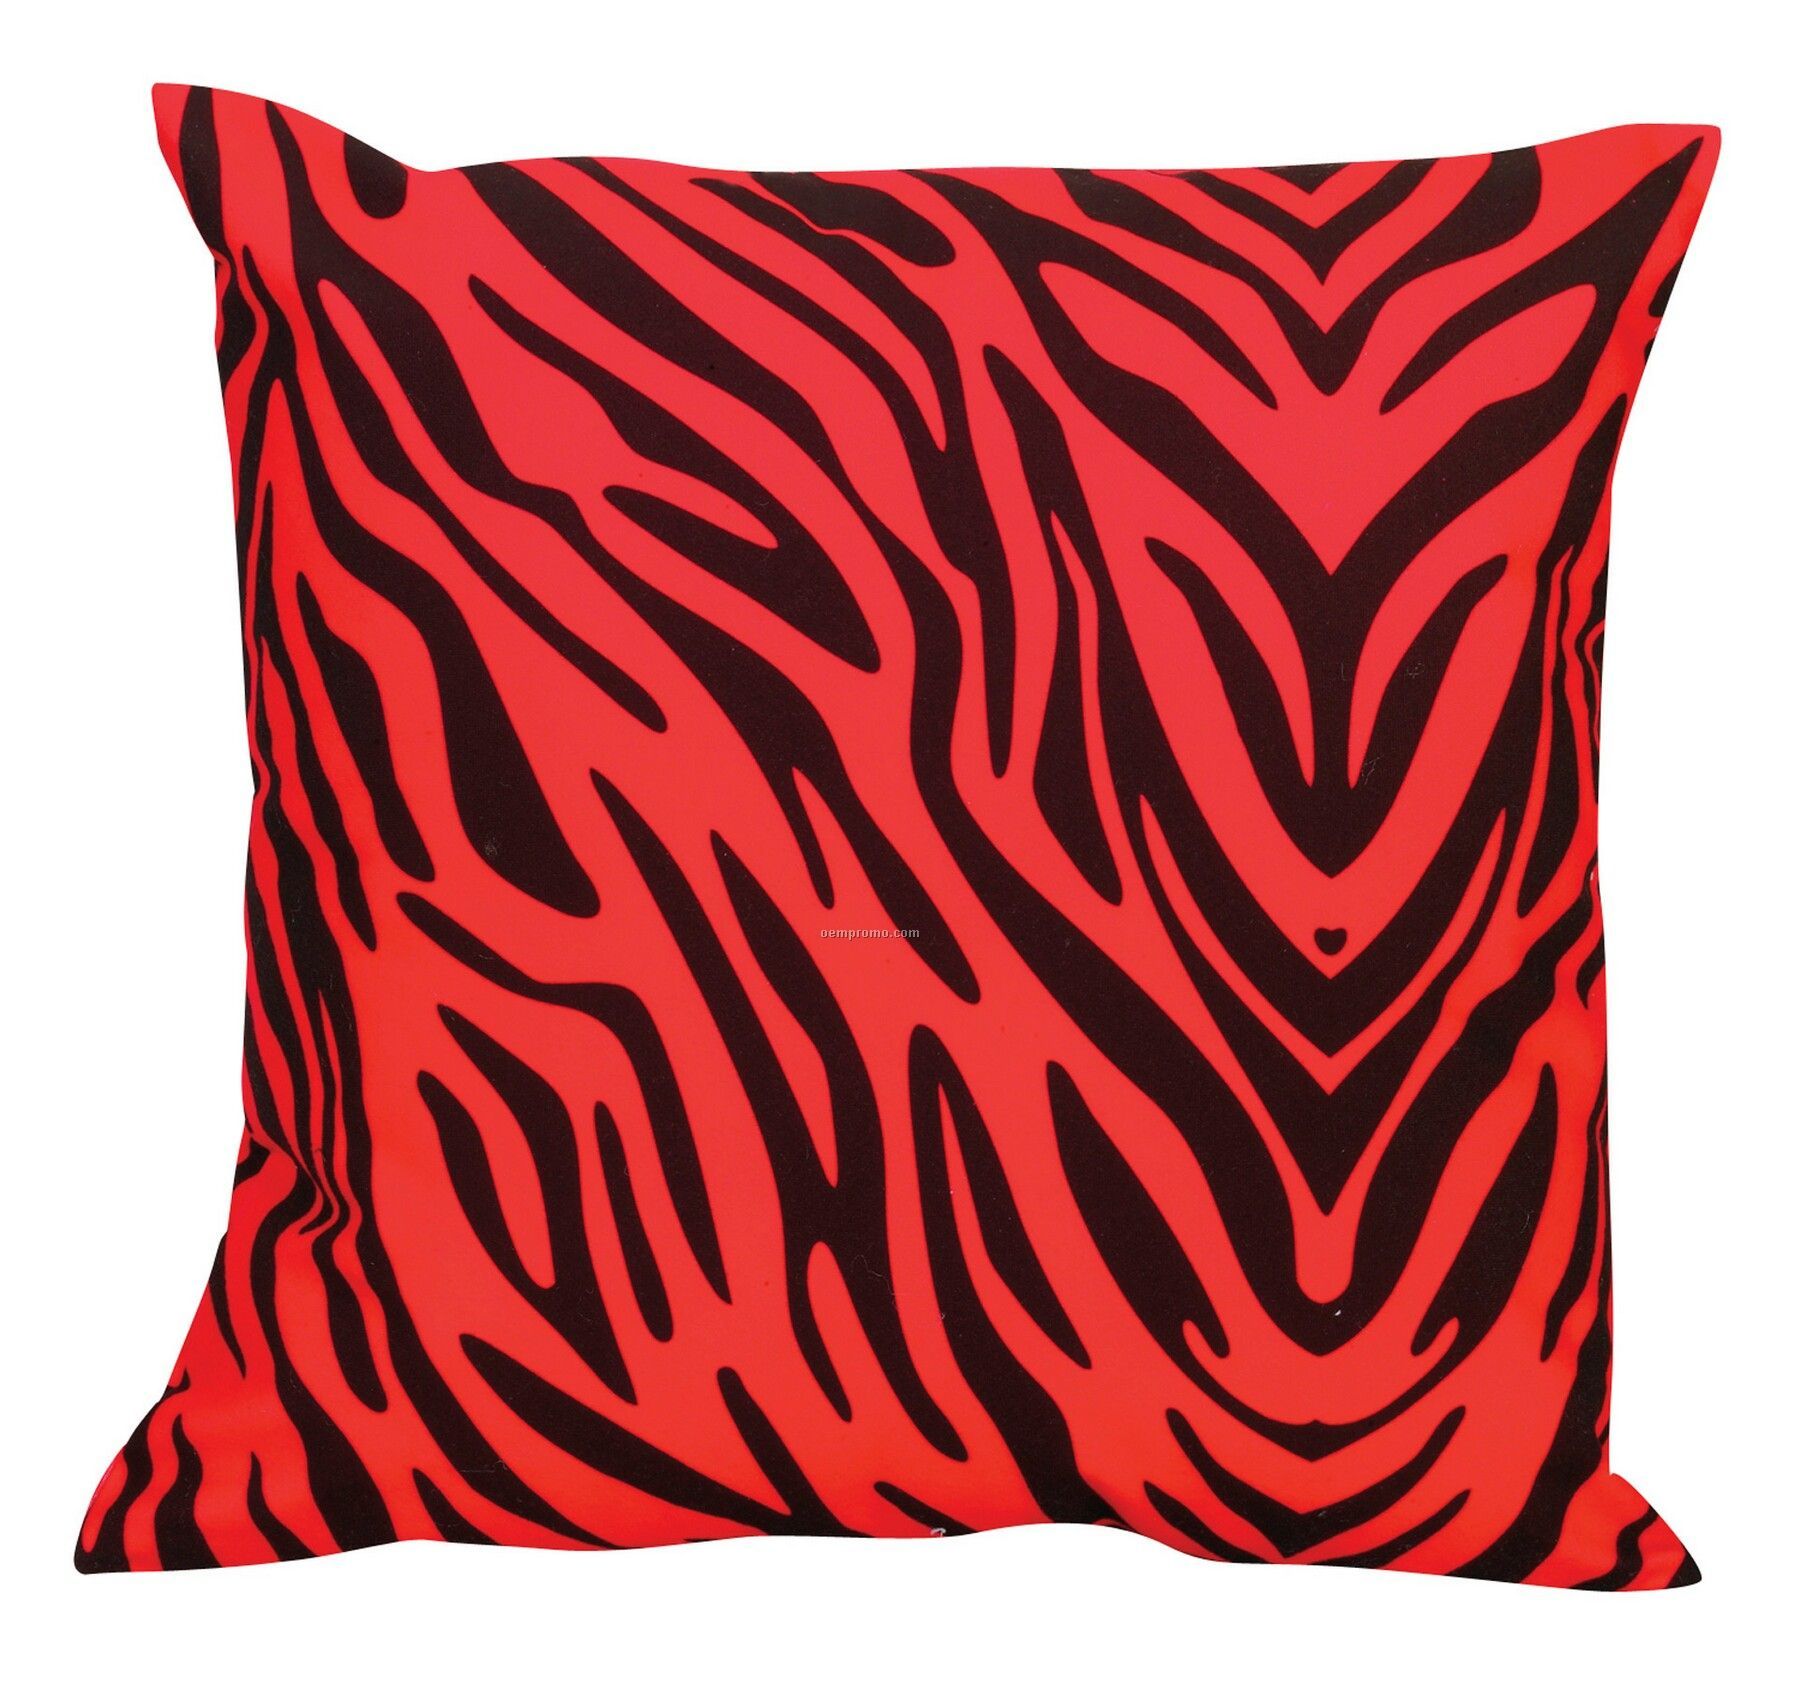 Dye Sublimated 16 X 16 Inch Throw Pillow